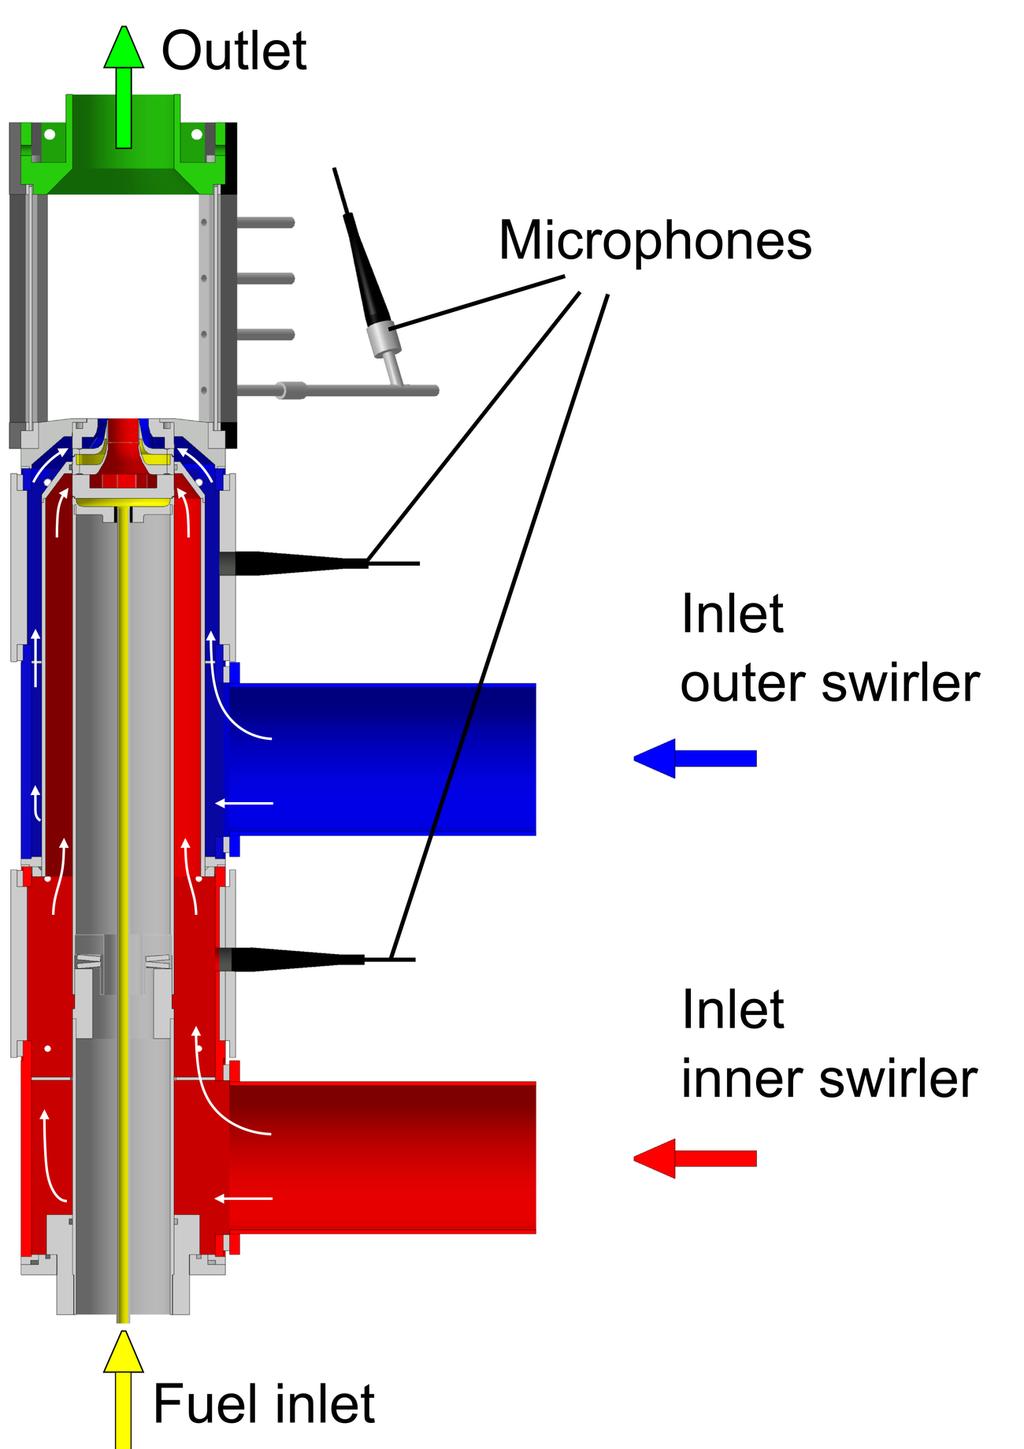 swirlers employ separate air supplies, which allows controlling the air flows through each swirler independently (Figure 1). The fuel plenum is located inside the inner tube of the inner plenum.